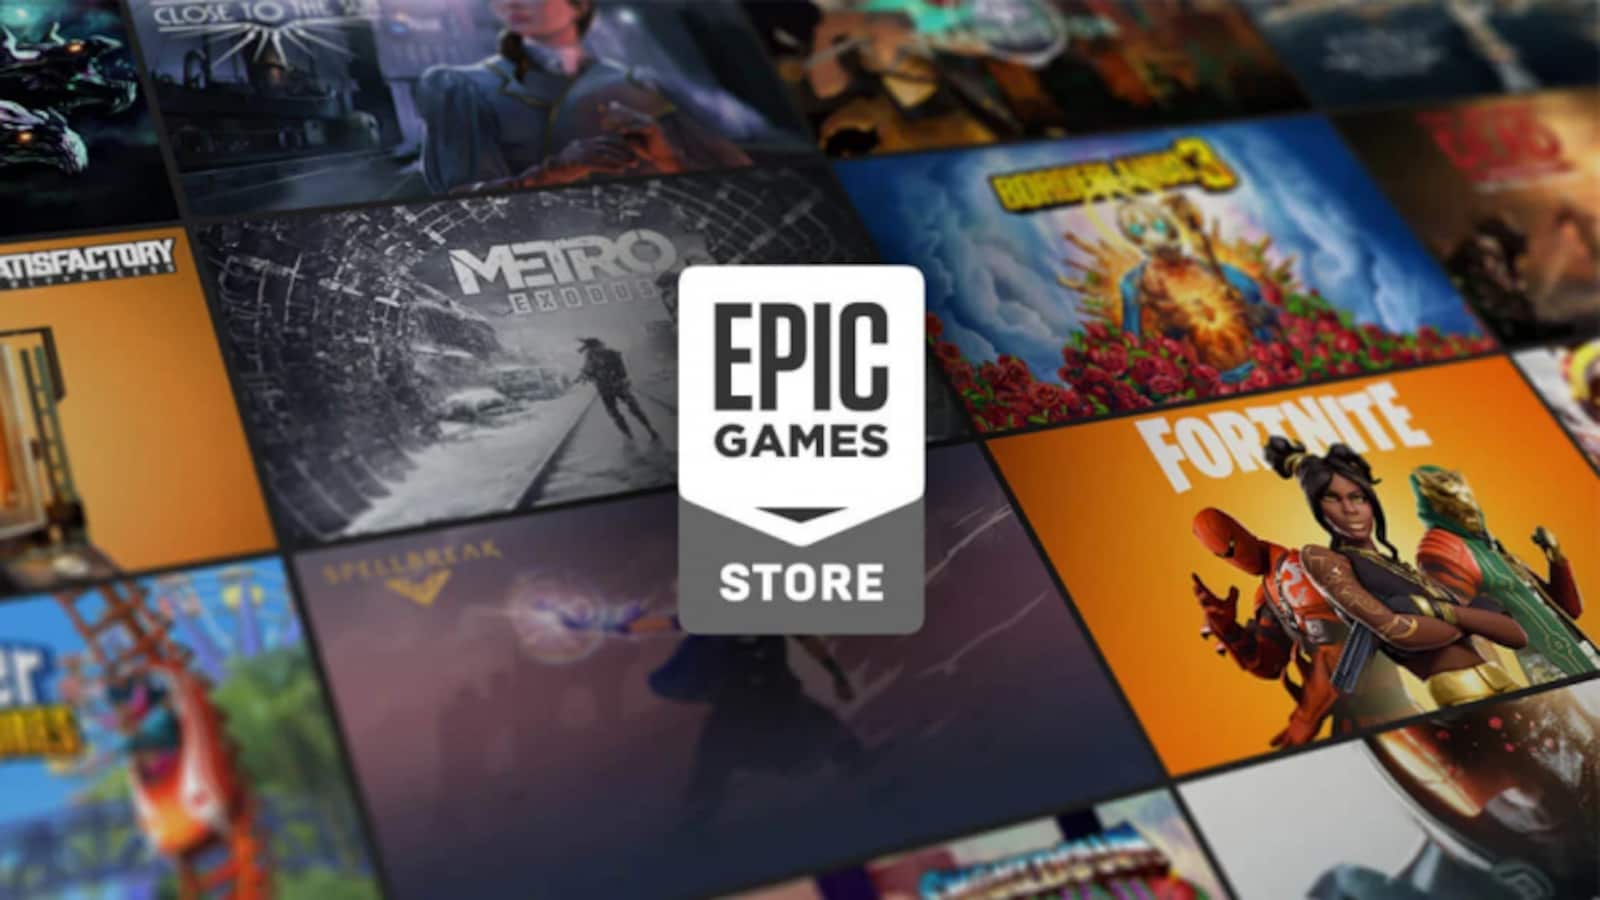 Fortnite maker Epic Games to pay $520 million to settle FTC cases